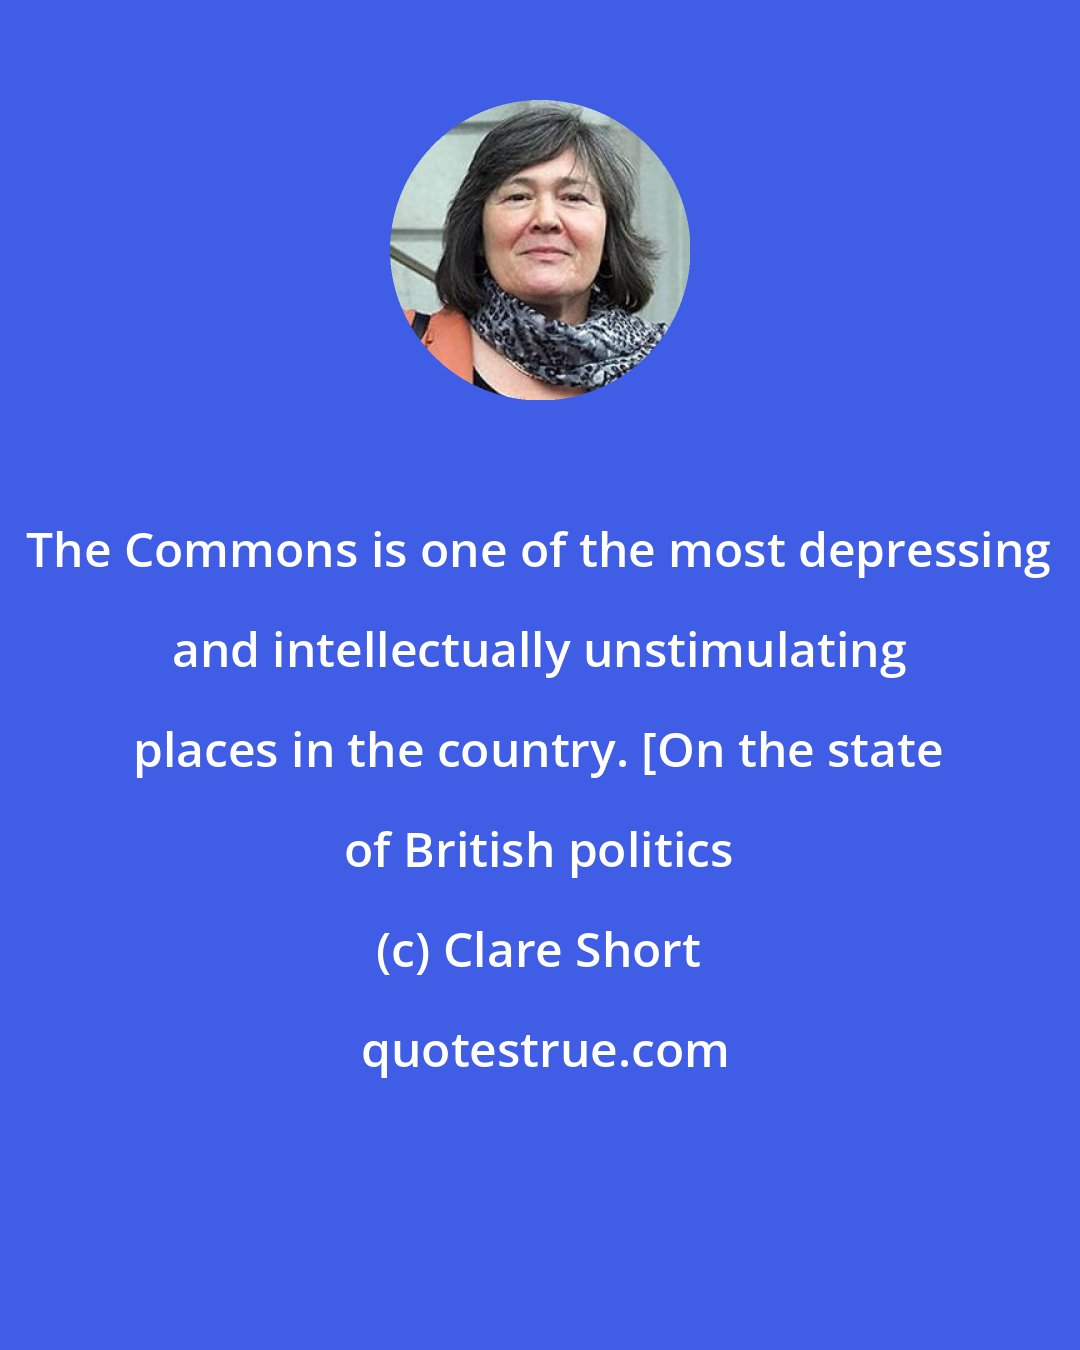 Clare Short: The Commons is one of the most depressing and intellectually unstimulating places in the country. [On the state of British politics